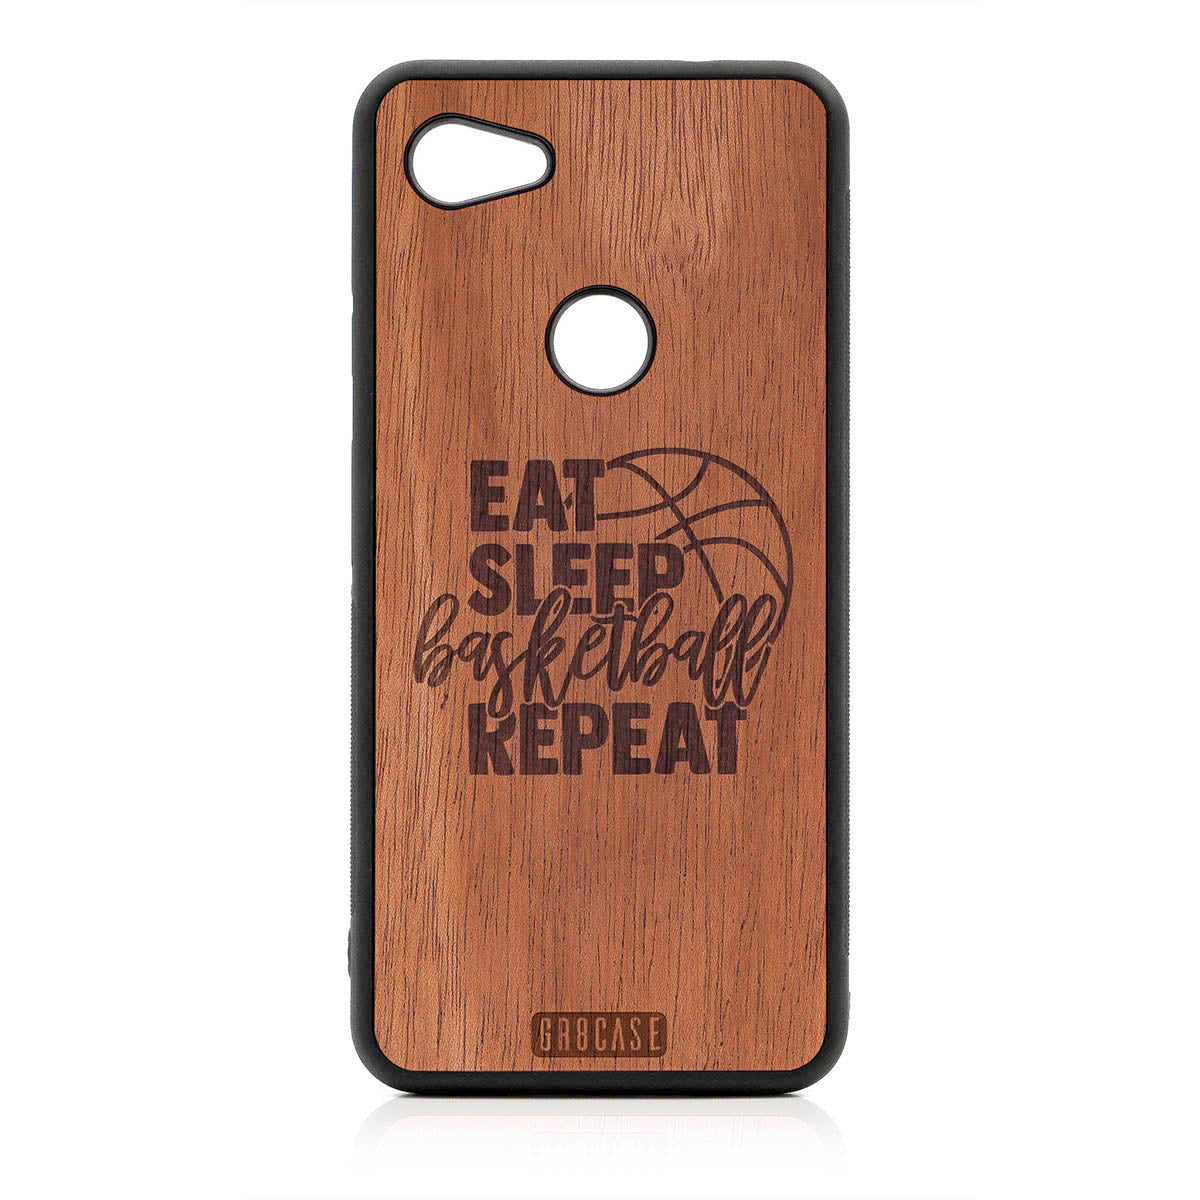 Eat Sleep Basketball Repeat Design Wood Case For Google Pixel 3A